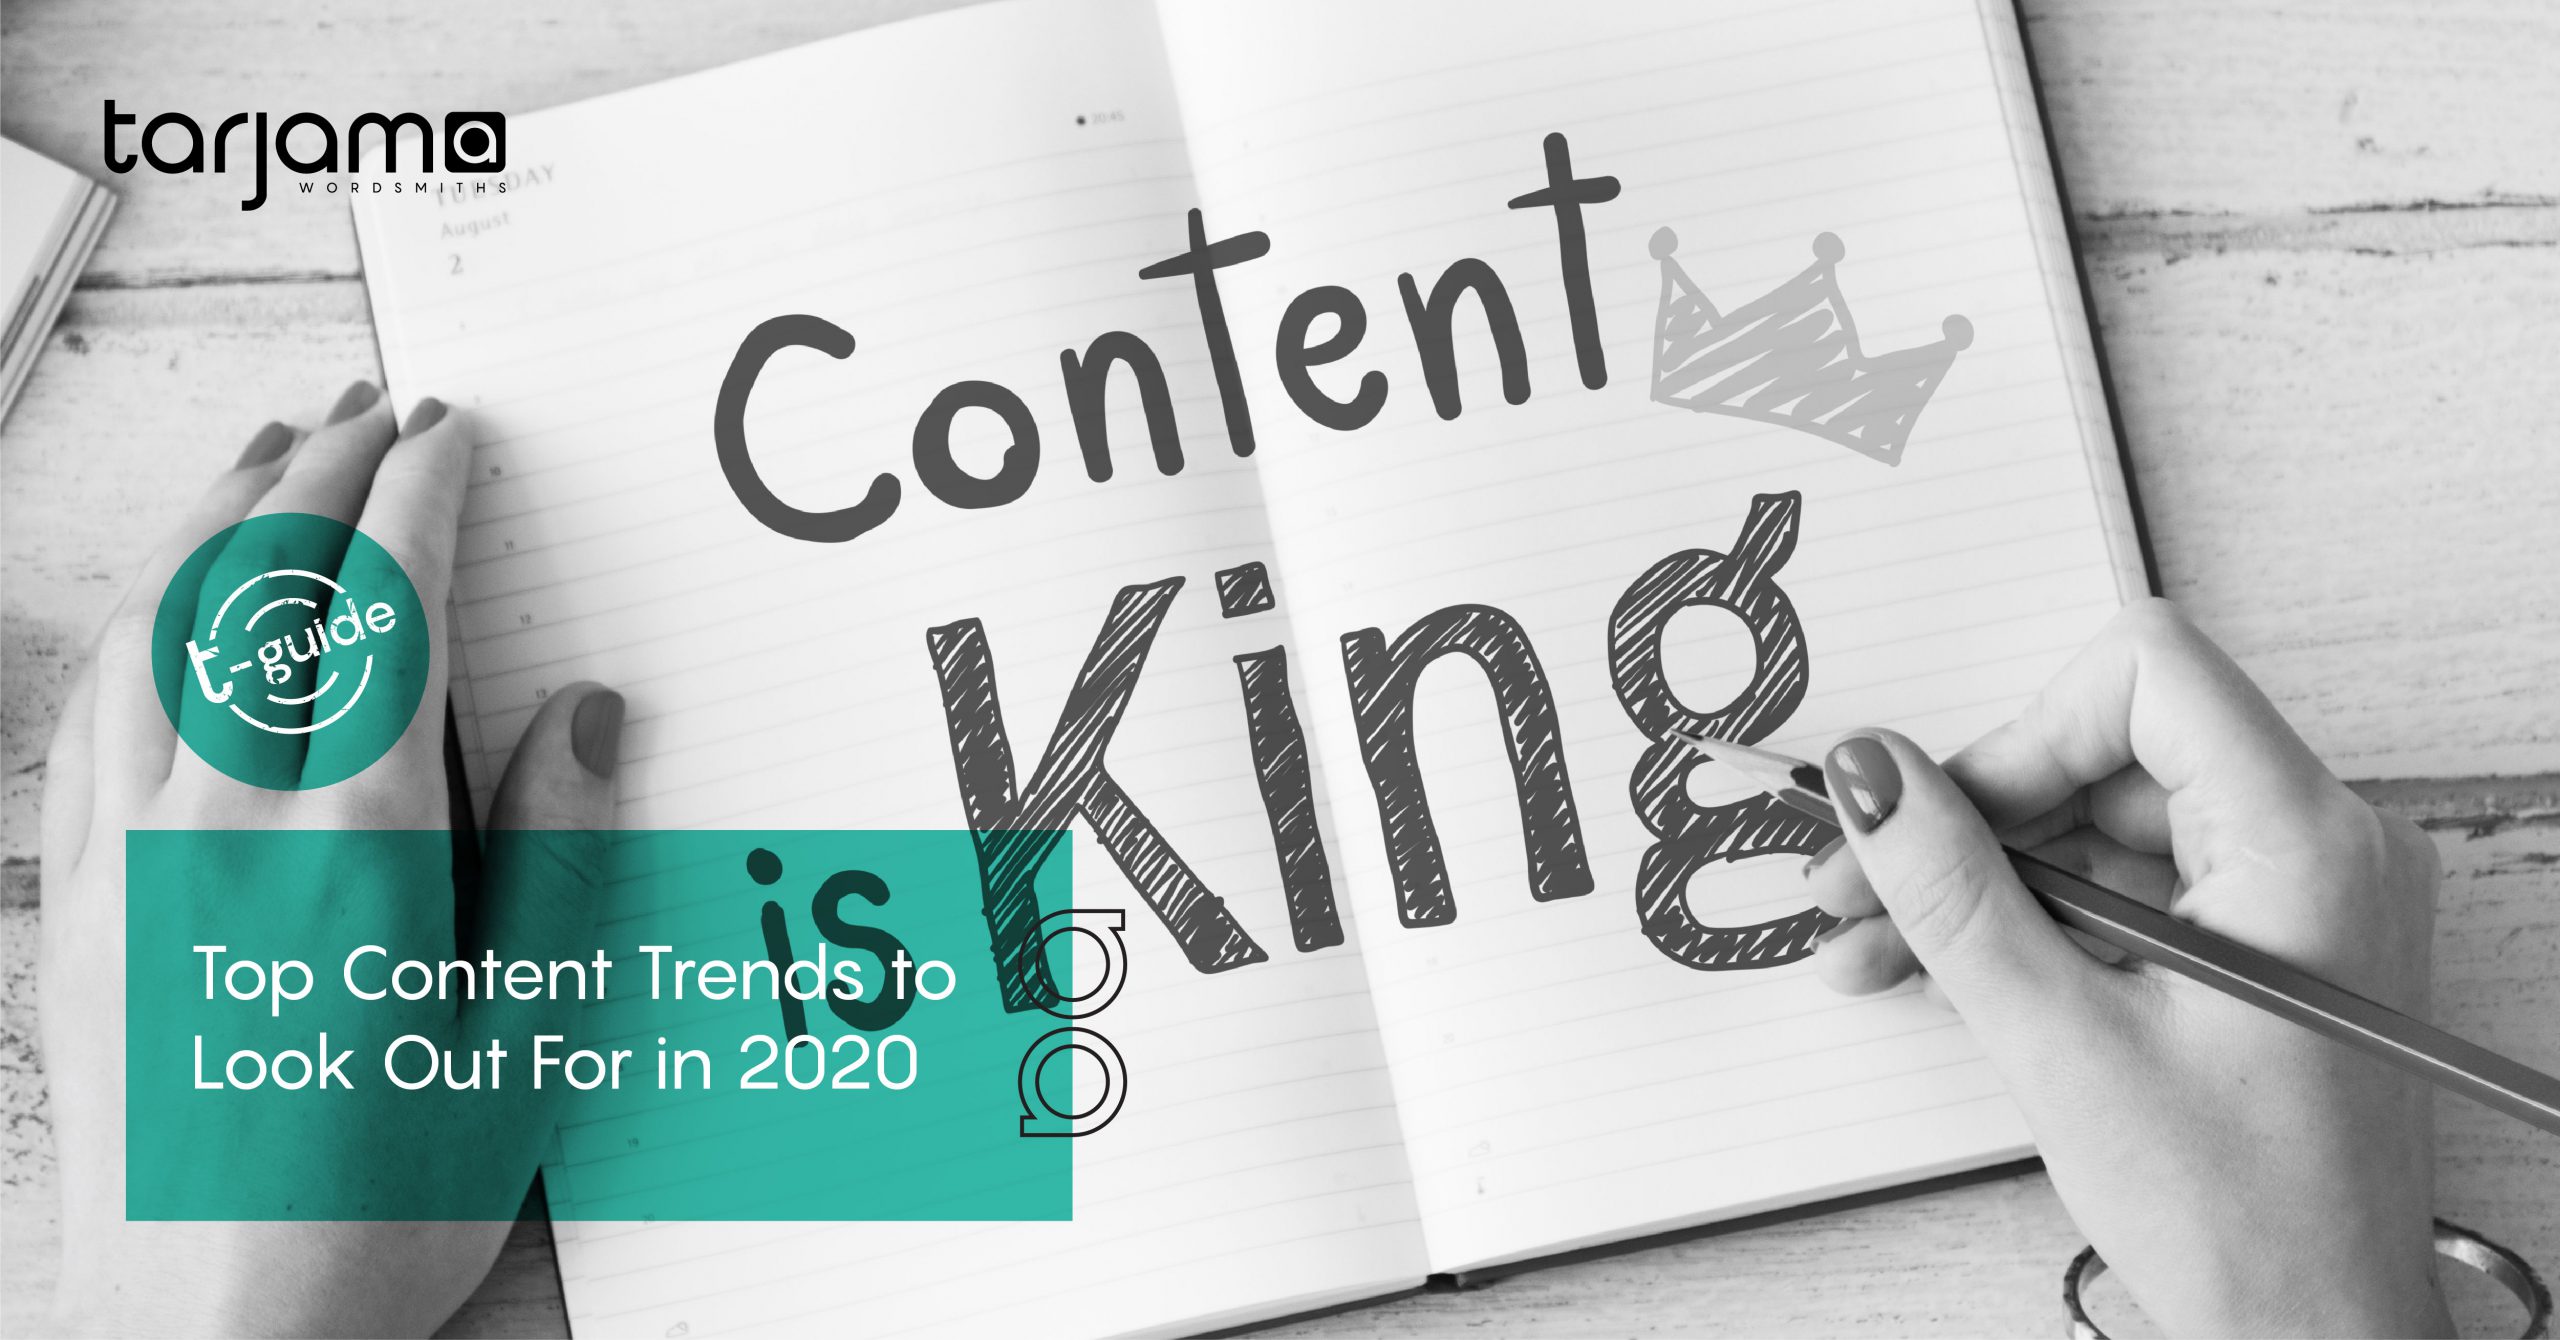 Top Content Trends to Look Out for in 2020